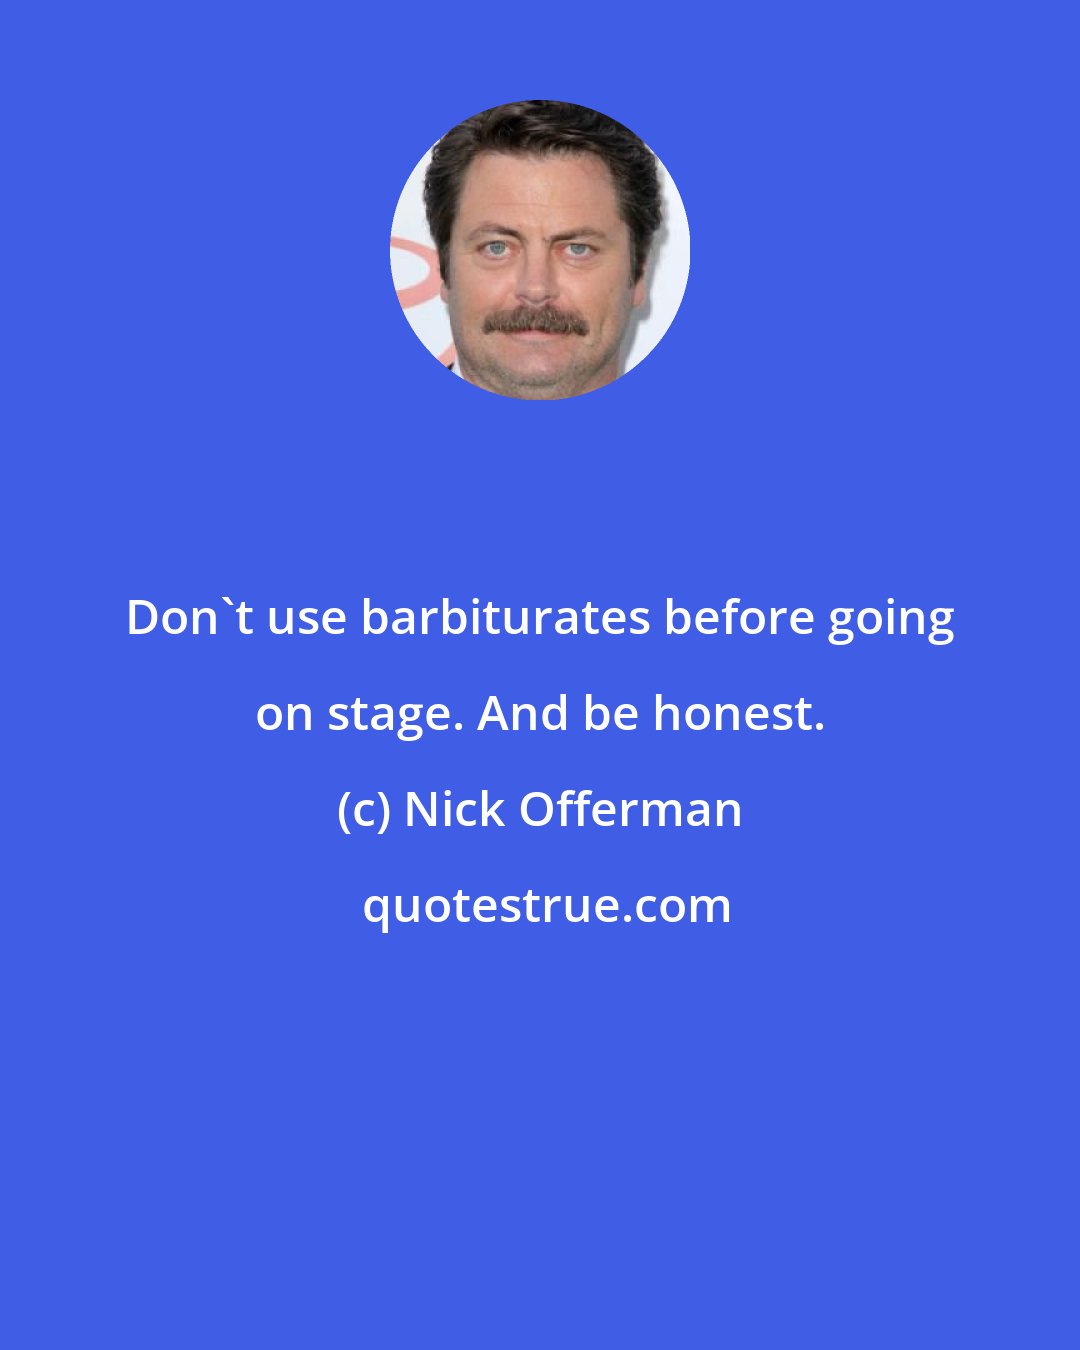 Nick Offerman: Don't use barbiturates before going on stage. And be honest.